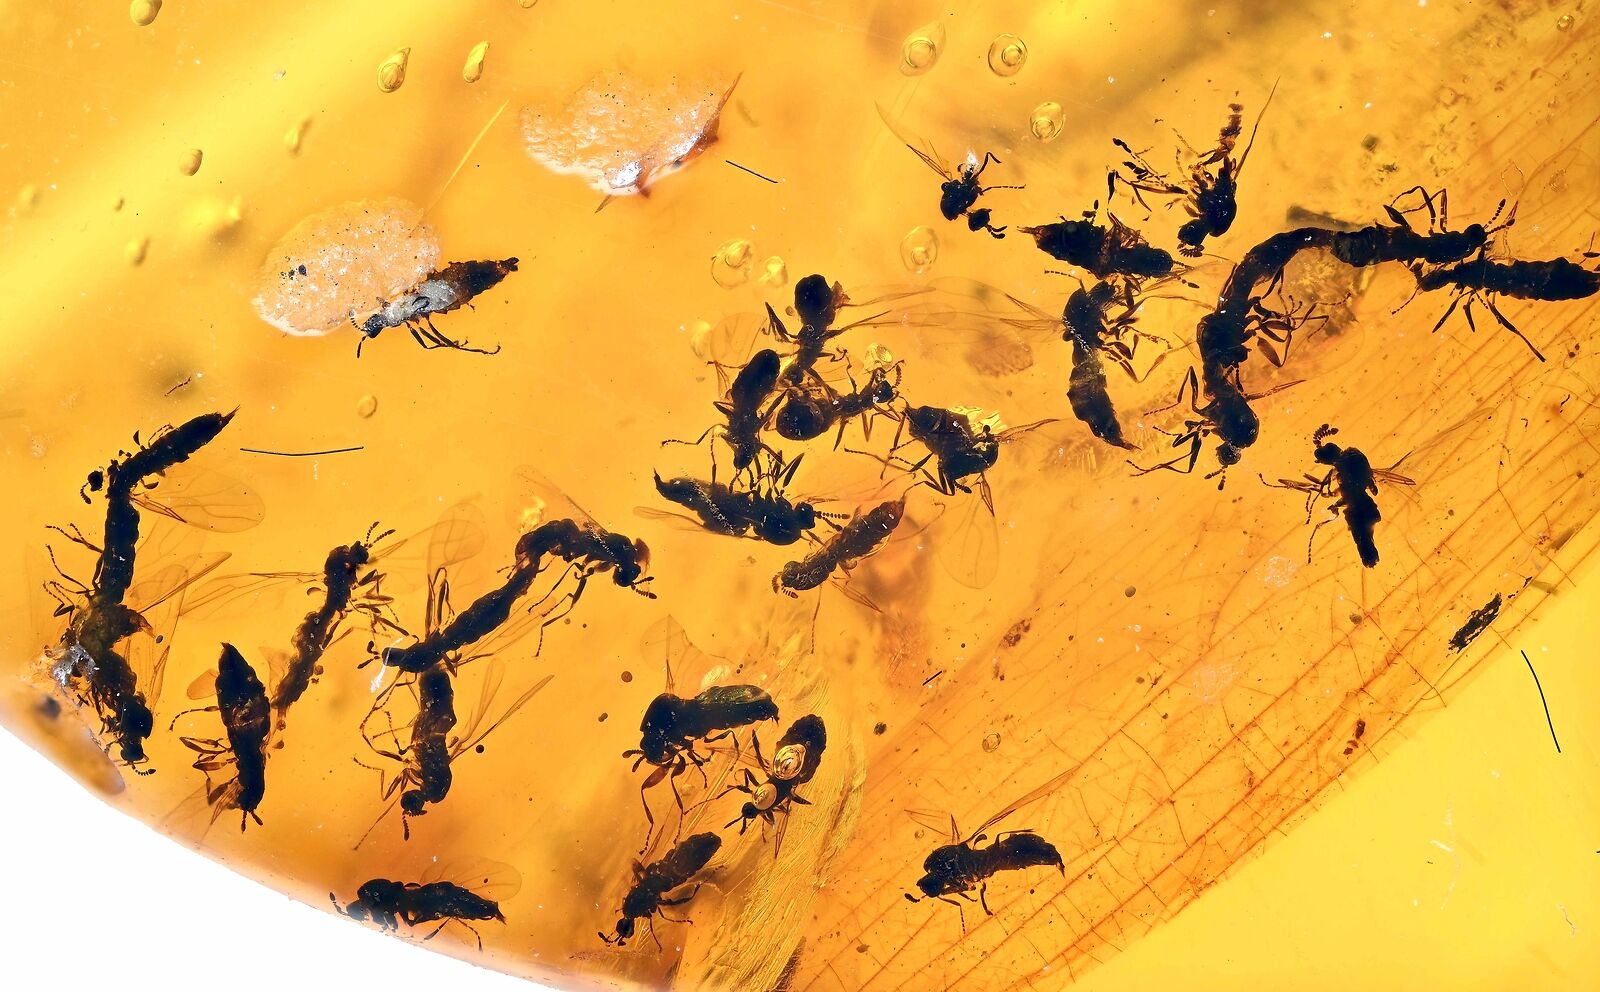 Swarm of flies with mating pairs, Fossil inclusion in Burmese Amber